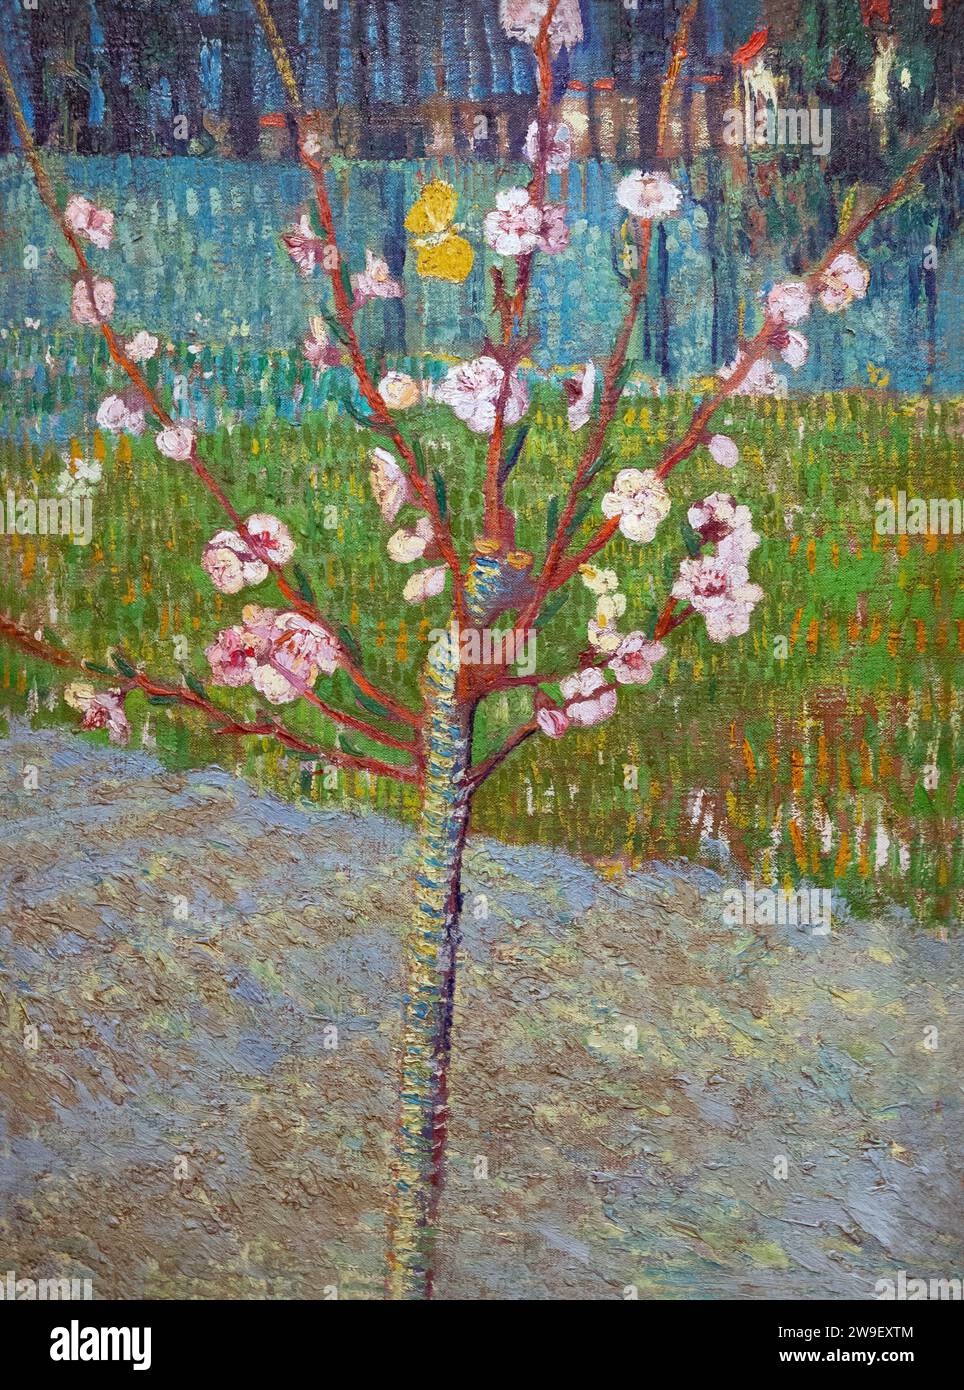 Peach Tree in Blossom, Alammond Tree in Blossom, Vincent van Gogh, 1888, Banque D'Images